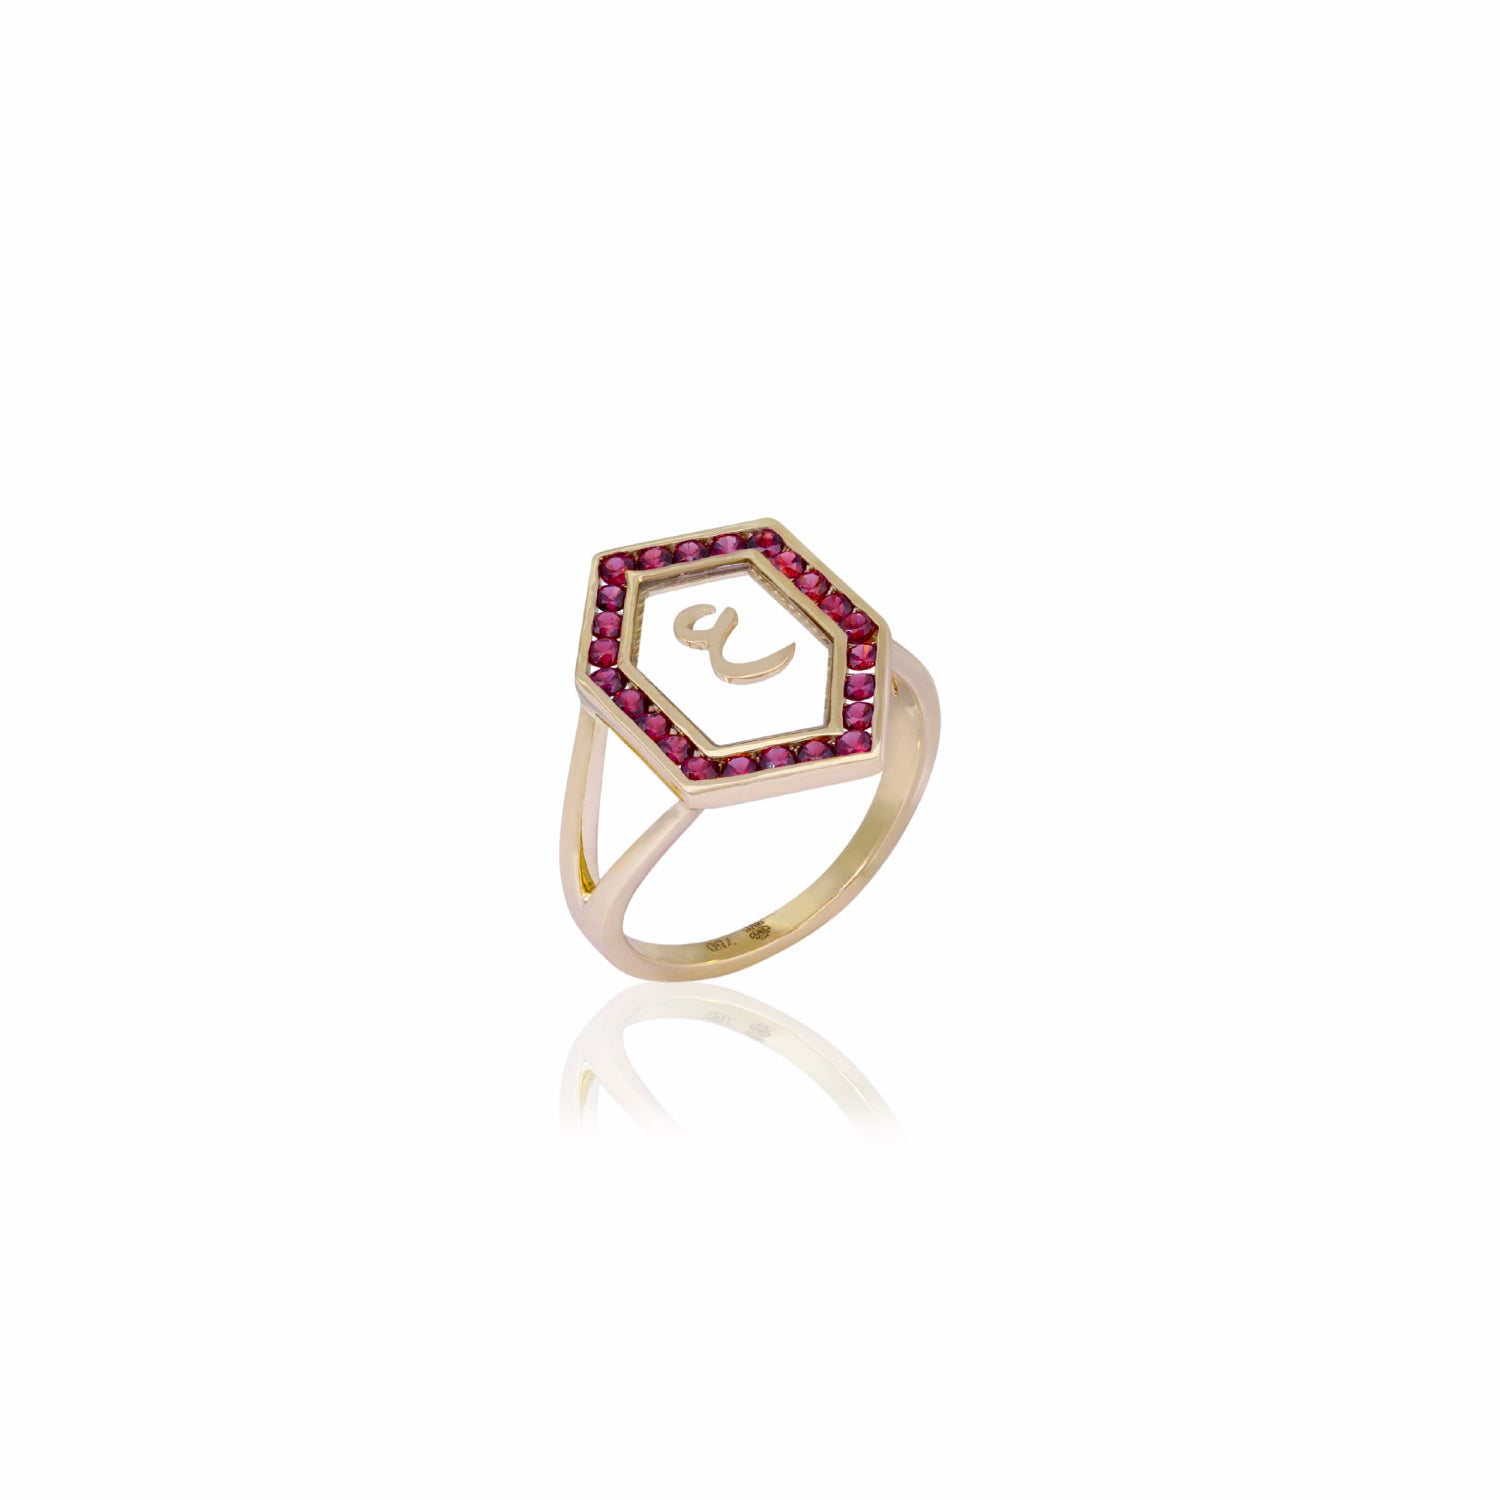 Qamoos 1.0 Letter ع Ruby Ring in Yellow Gold